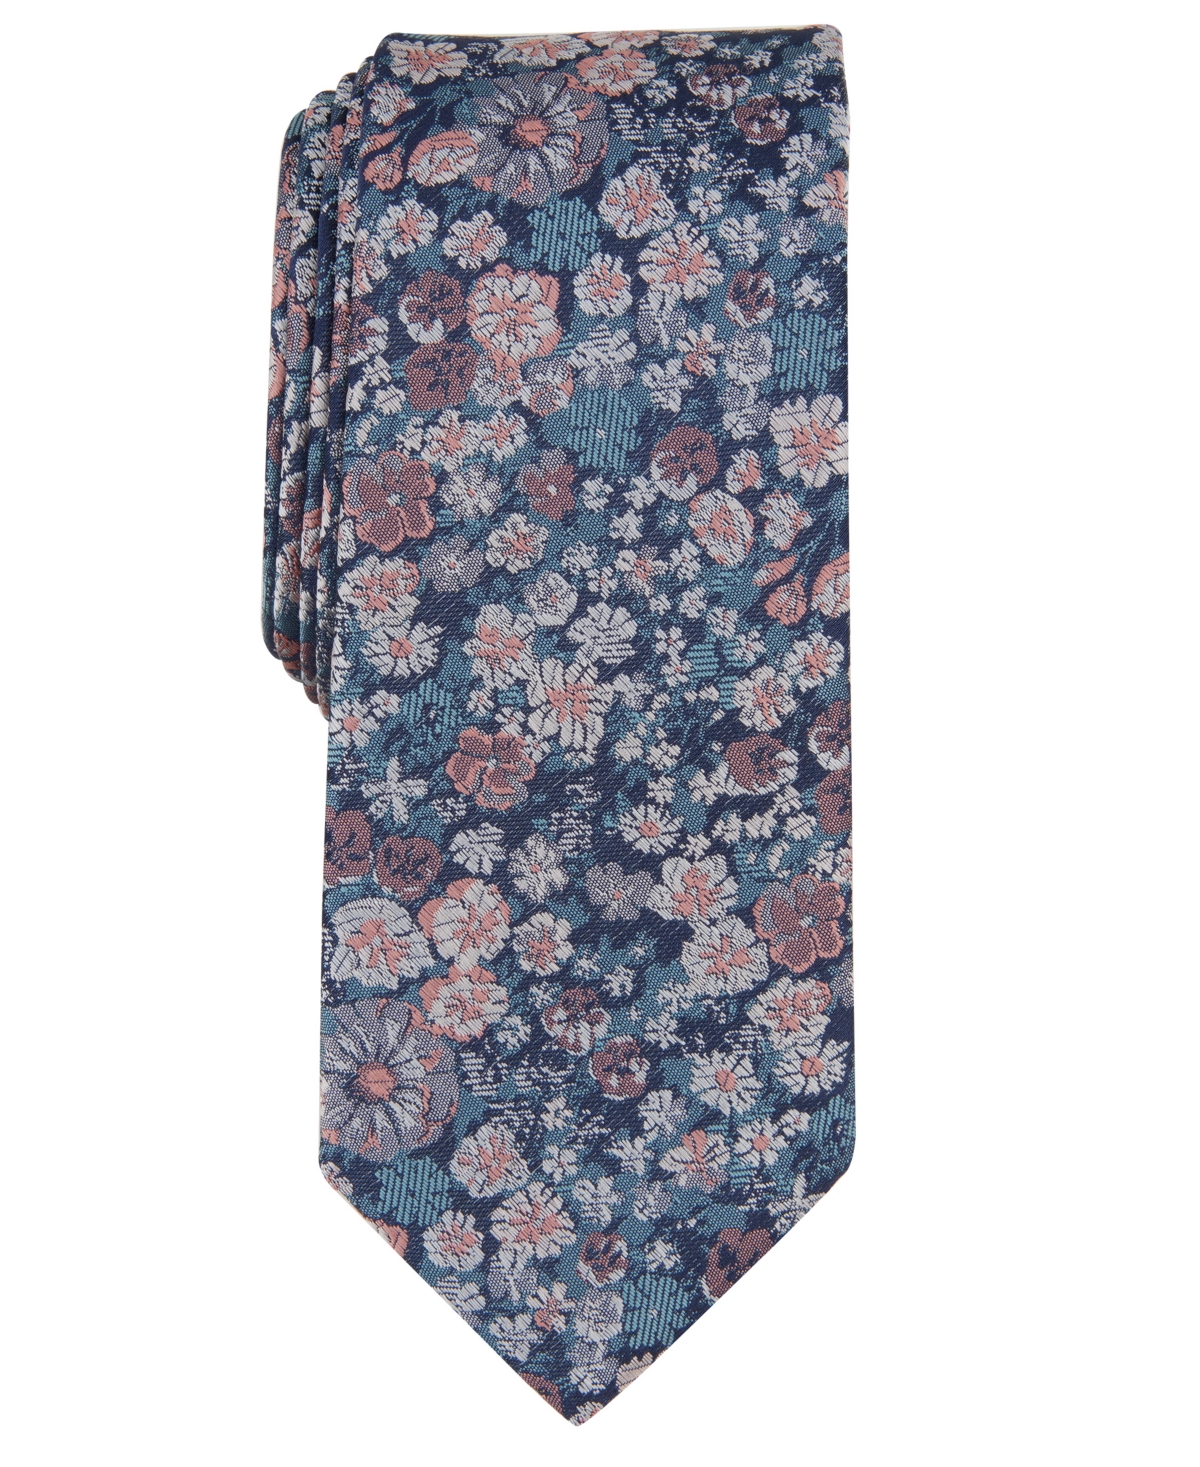 Men's Charland Floral Tie, Created for Macy's - Peach